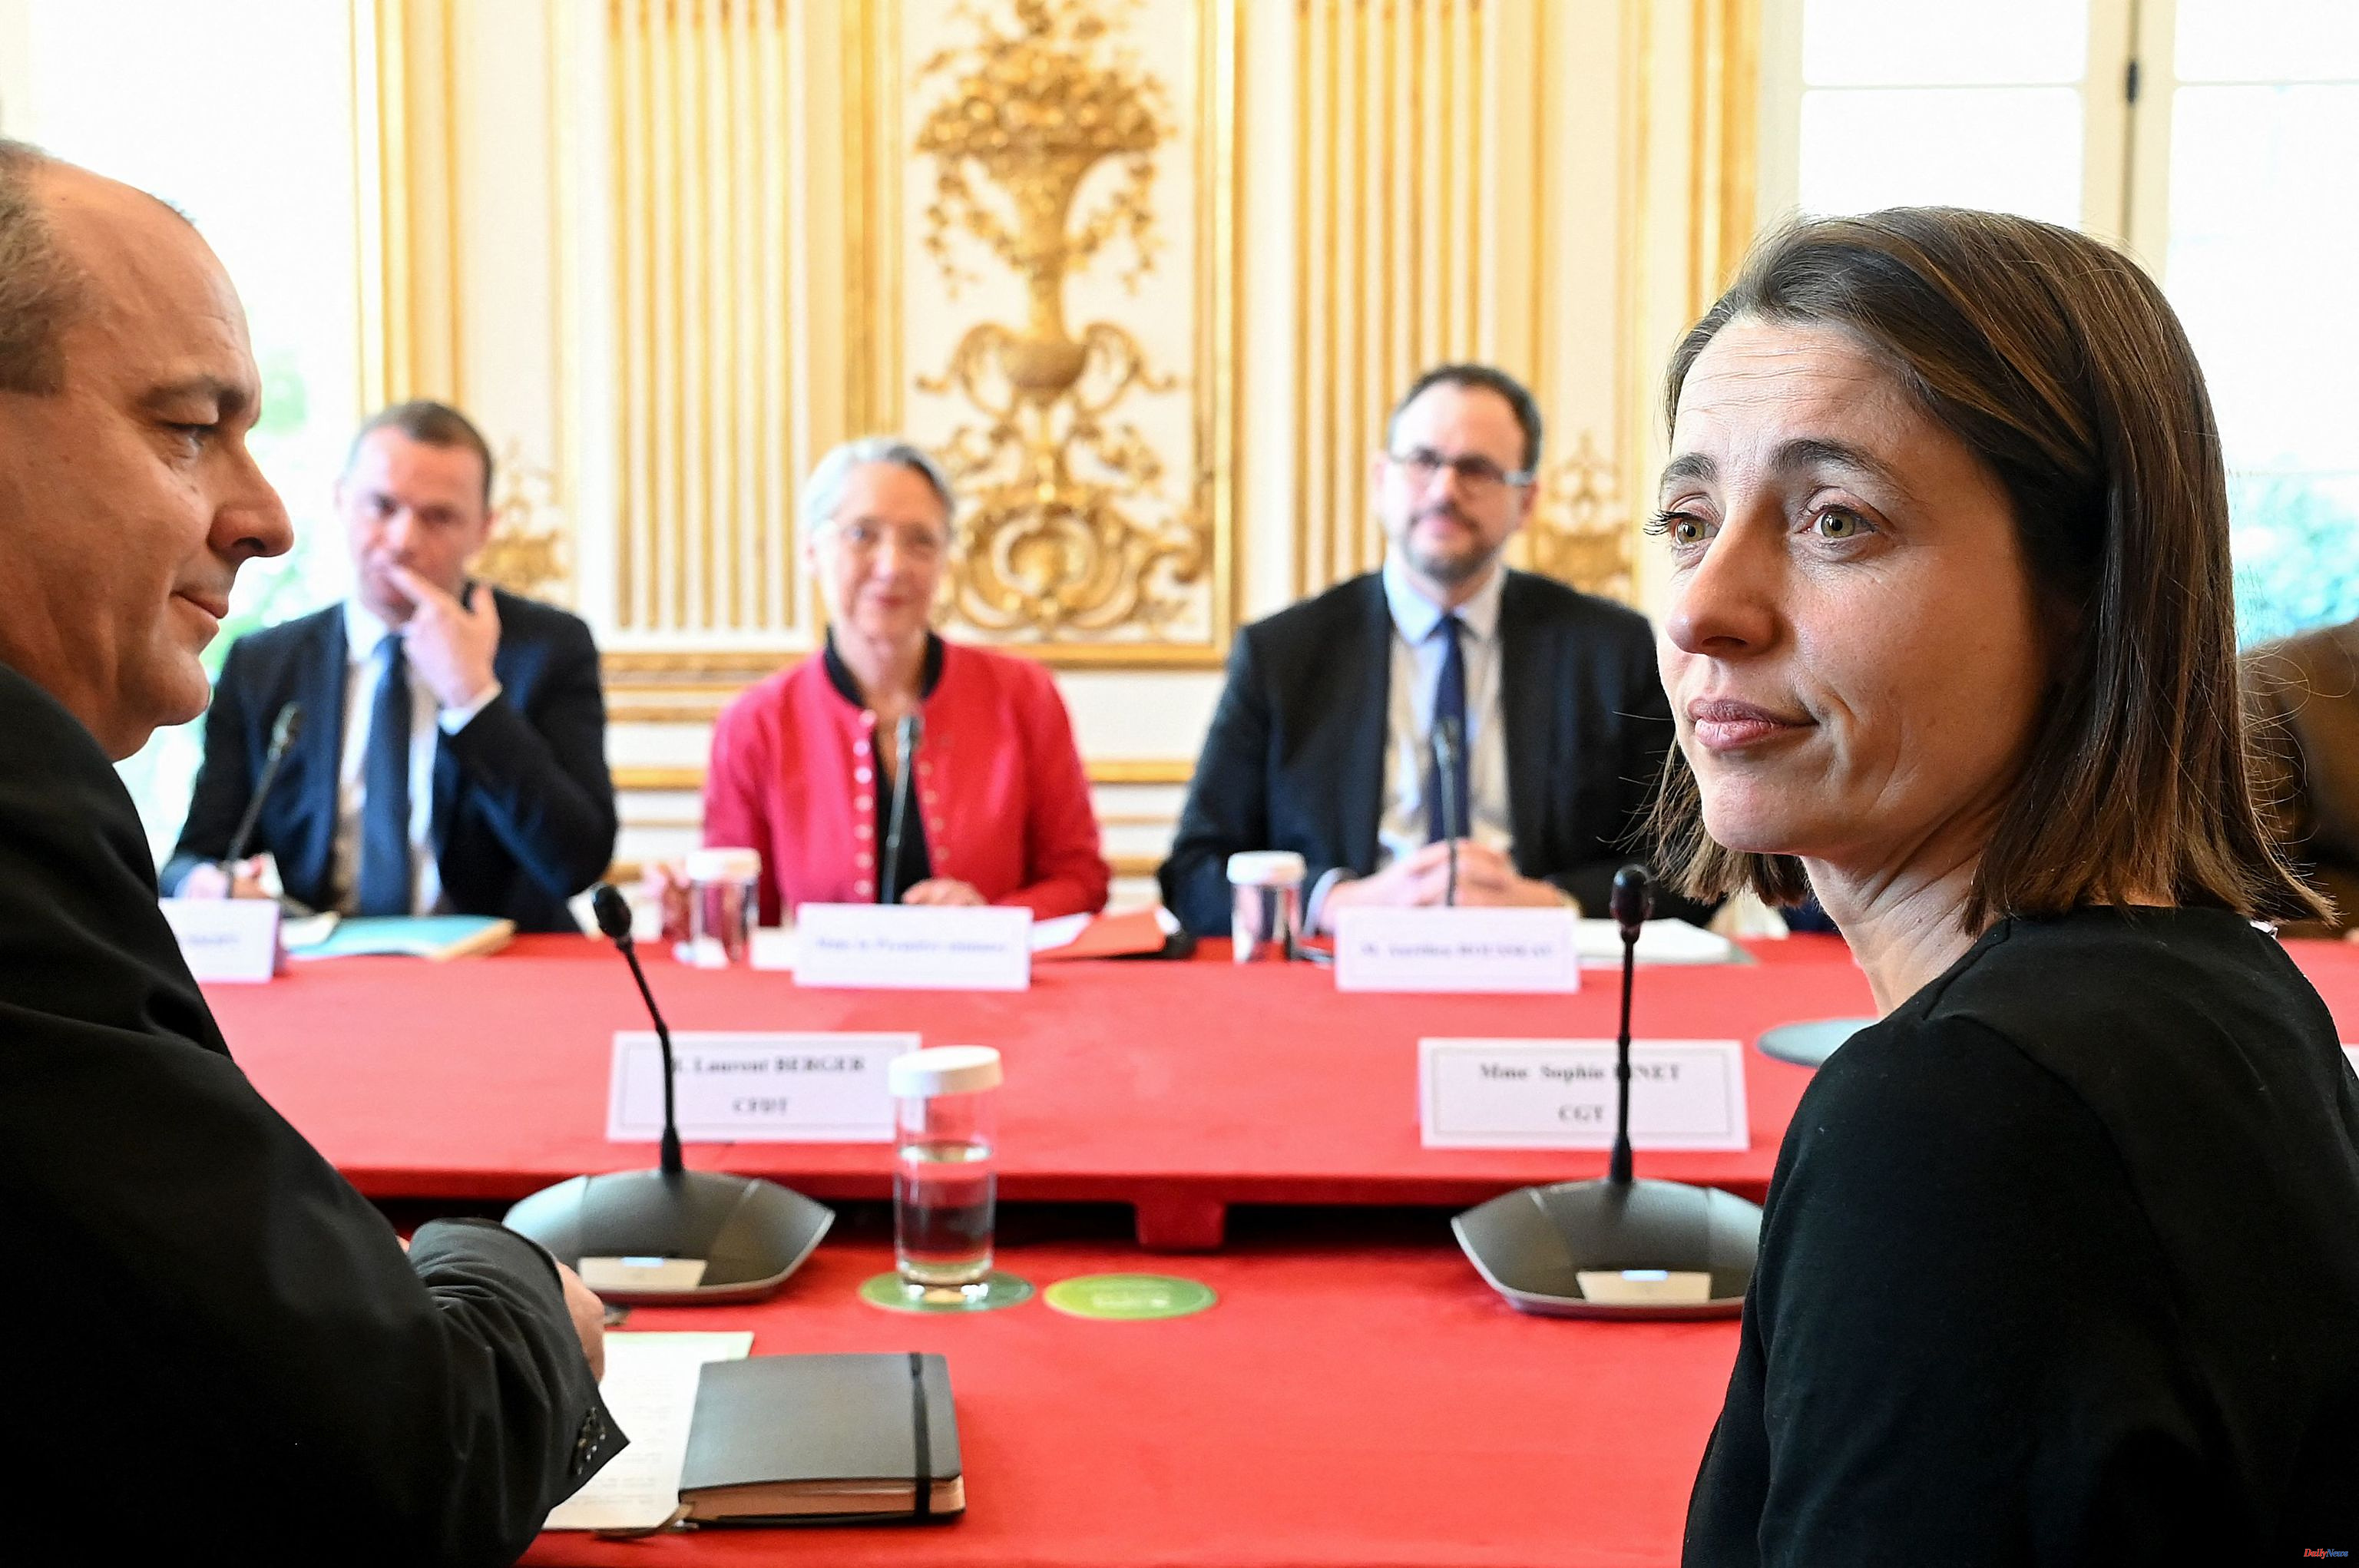 Politics The meeting of the French Government with the unions to unblock the pension crisis fails